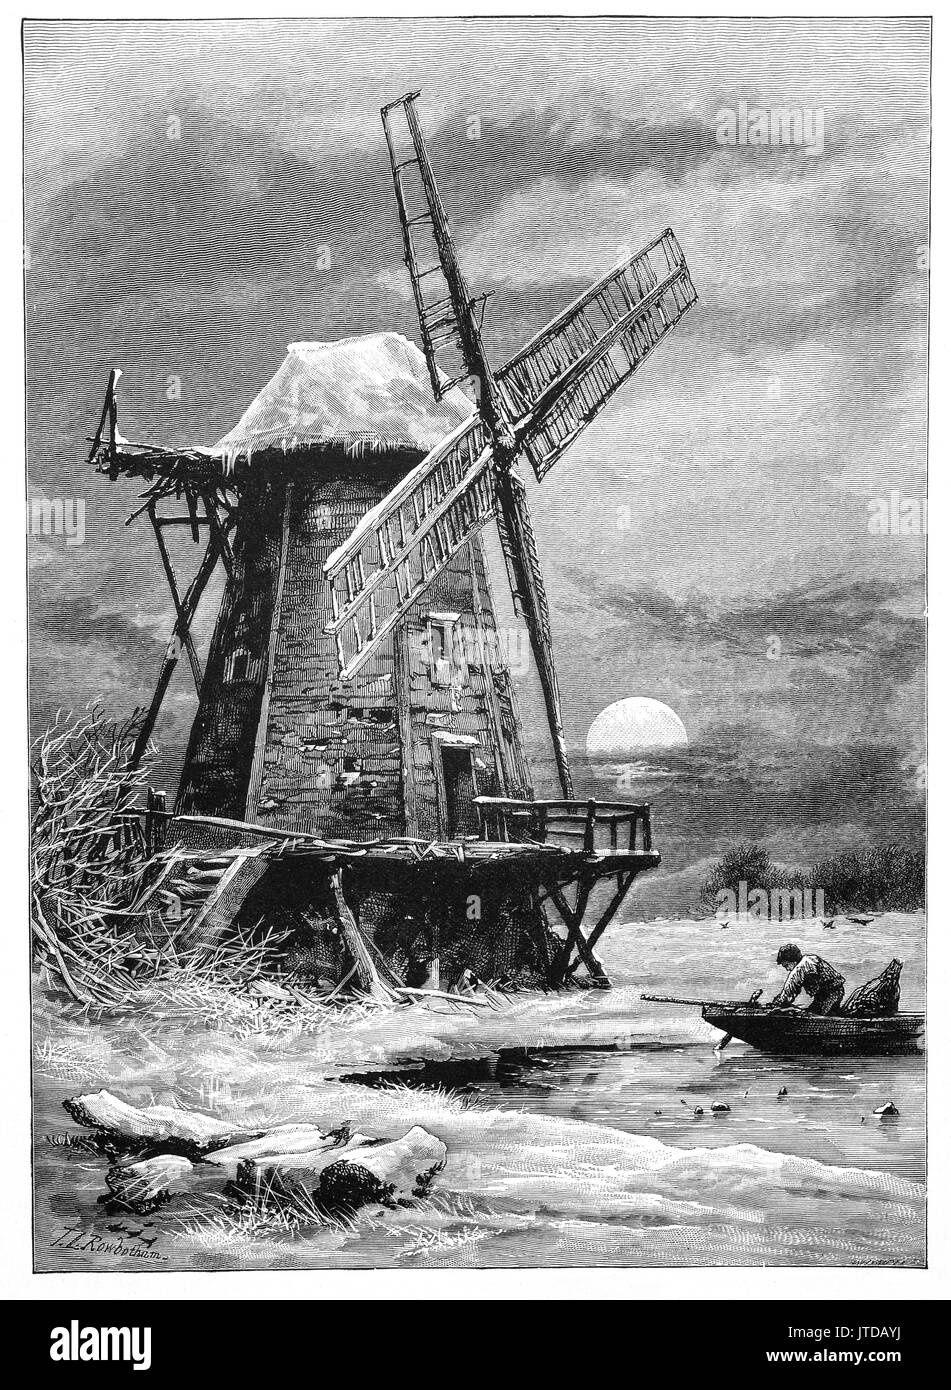 1870: On a frosty moonlit night, a wildfowler prepares his punt. On the River Thames near the old Hampton Windmill, Surrey, England Stock Photo